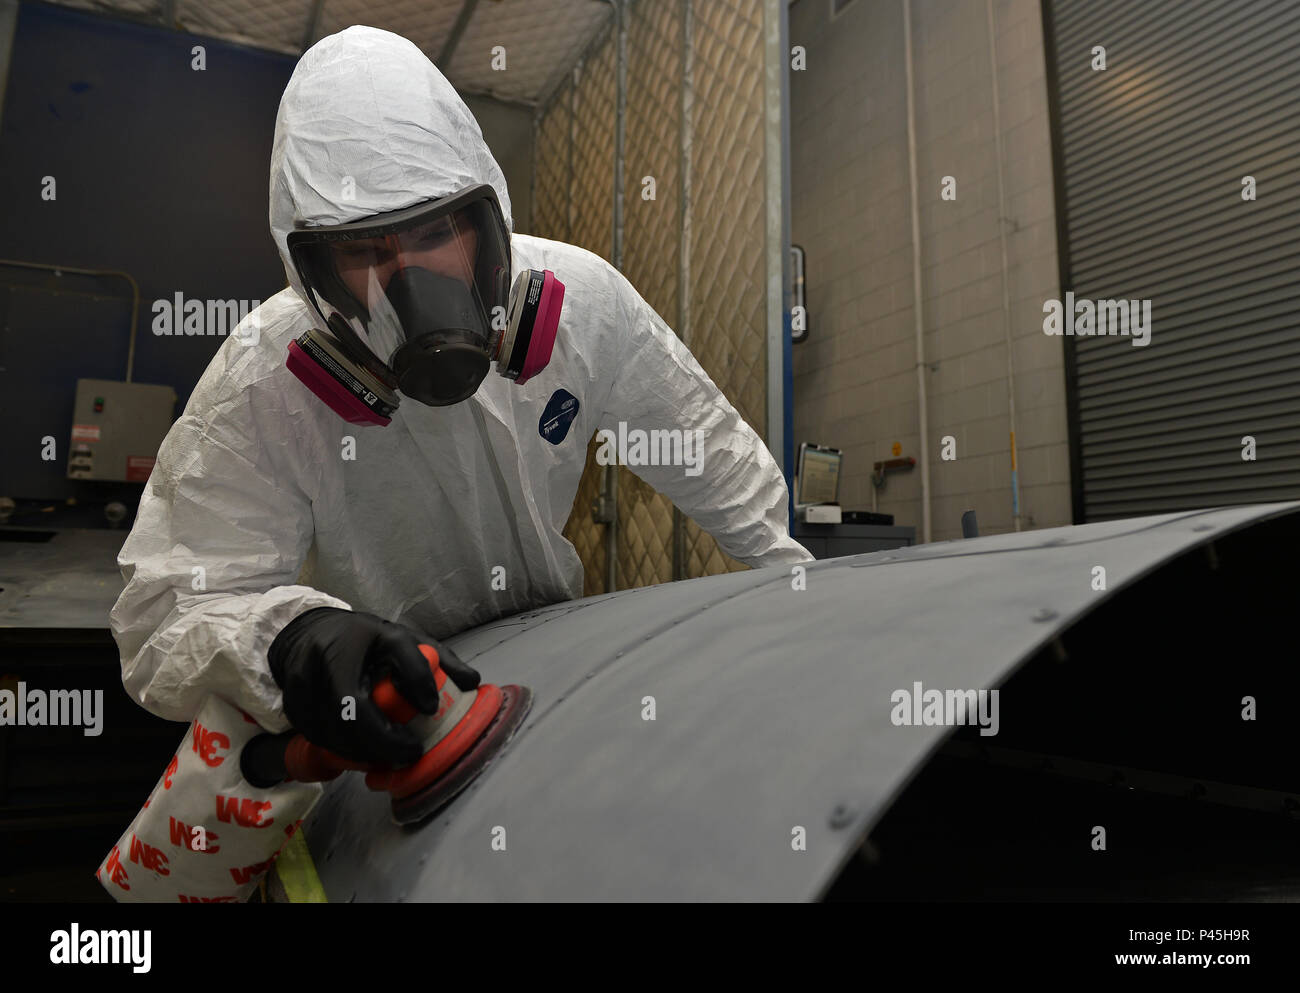 Airman Jay Adams, an aircraft structural maintenance journeyman with the 1st Special Operations Maintenance Squadron, sands an engine cowling at Hurlburt Field, Fla., June 29, 2016. The cowling has to be sanded to remove the old layer of paint in preparation for a new coat which will prevent corrosion. (U.S. Air Force photo by Senior Airman Andrea Posey) Stock Photo